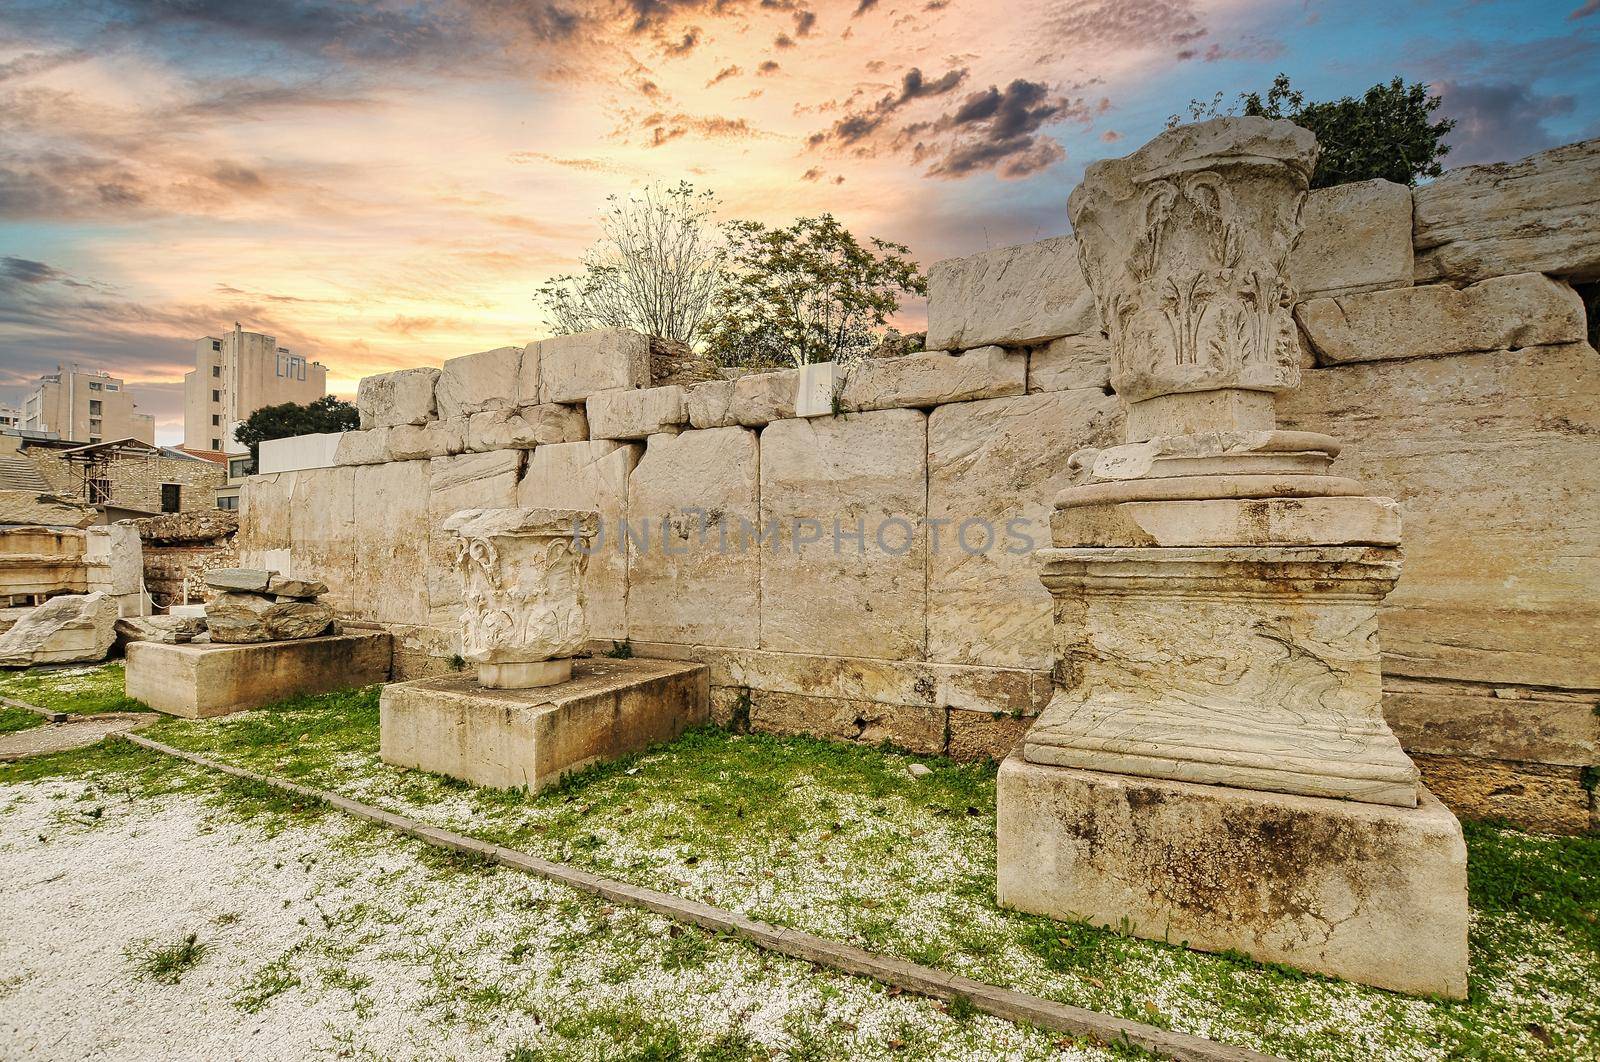 Panoramic view of the Library of Hadrian, Athens, Greece. It is one of the main landmarks of Athens. Scenery of Athens city center with Ancient Greek ruins. Famous Acropolis of Athens in the distance.